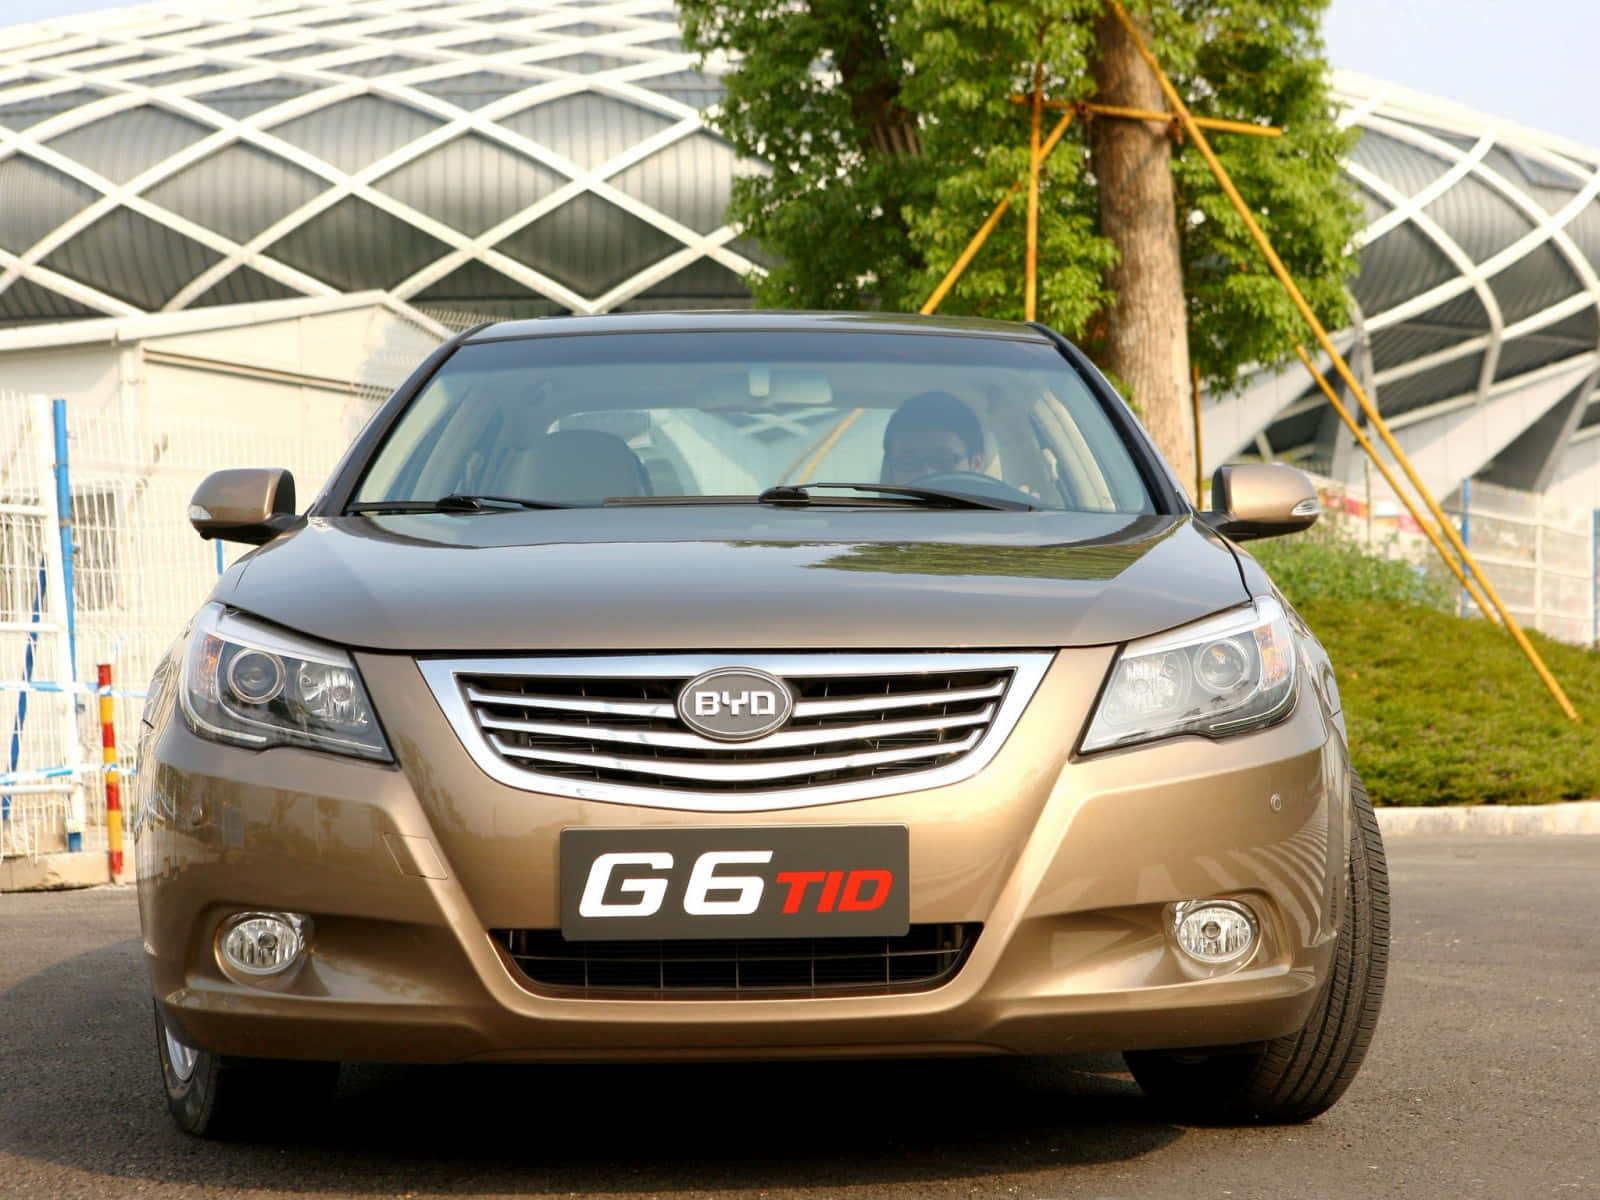 Stylish BYD Electric Vehicle on the Road Wallpaper